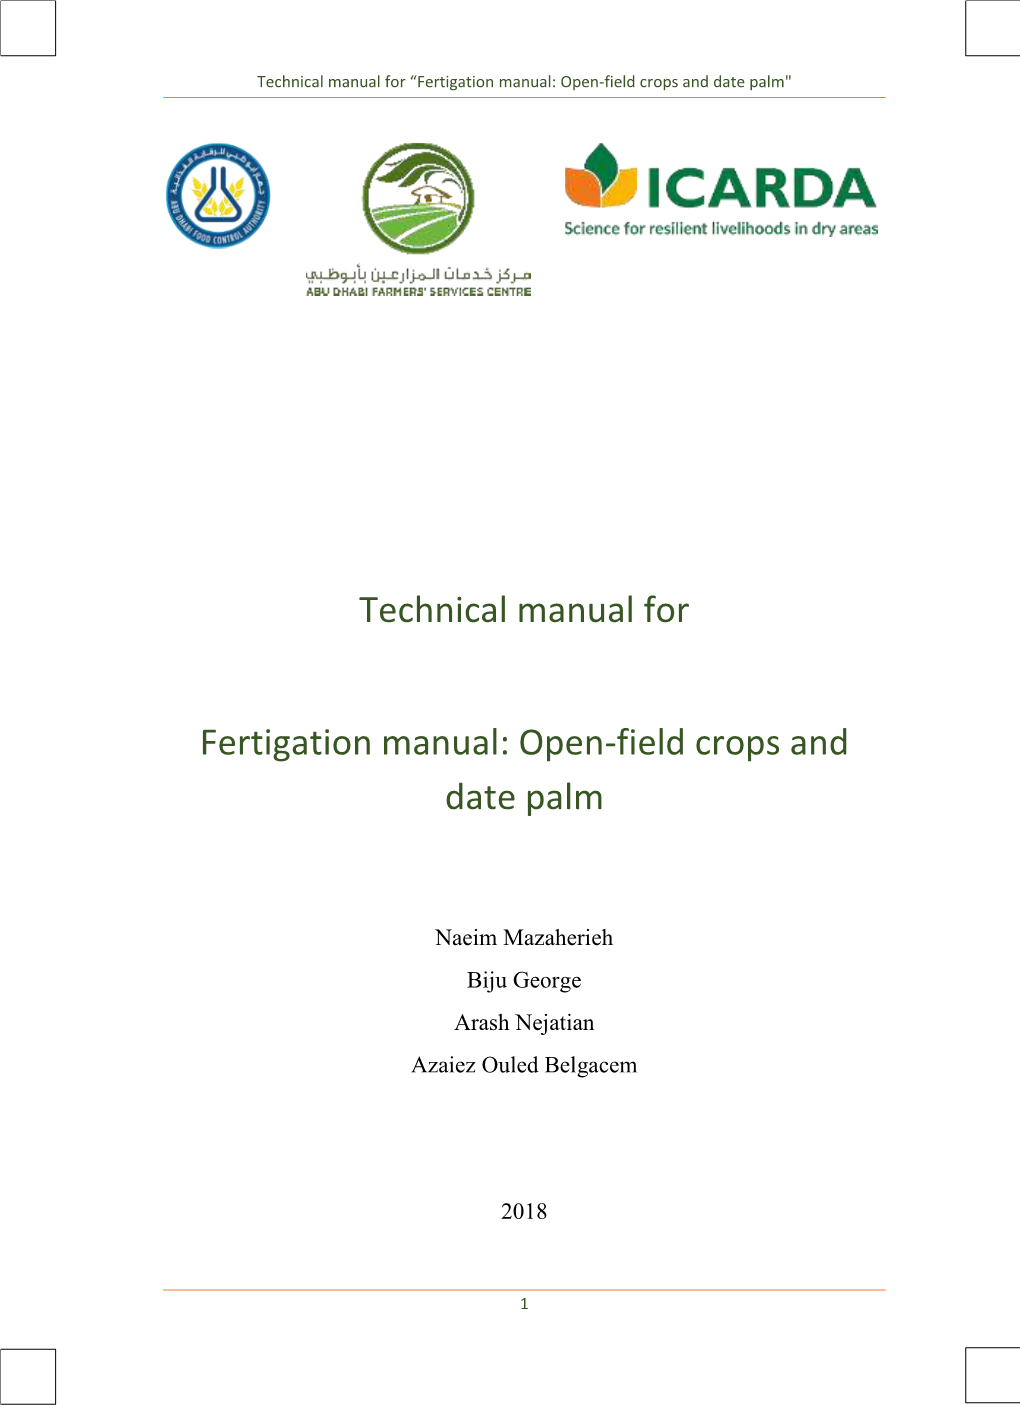 Technical Manual for Fertigation Manual: Open-Field Crops and Date